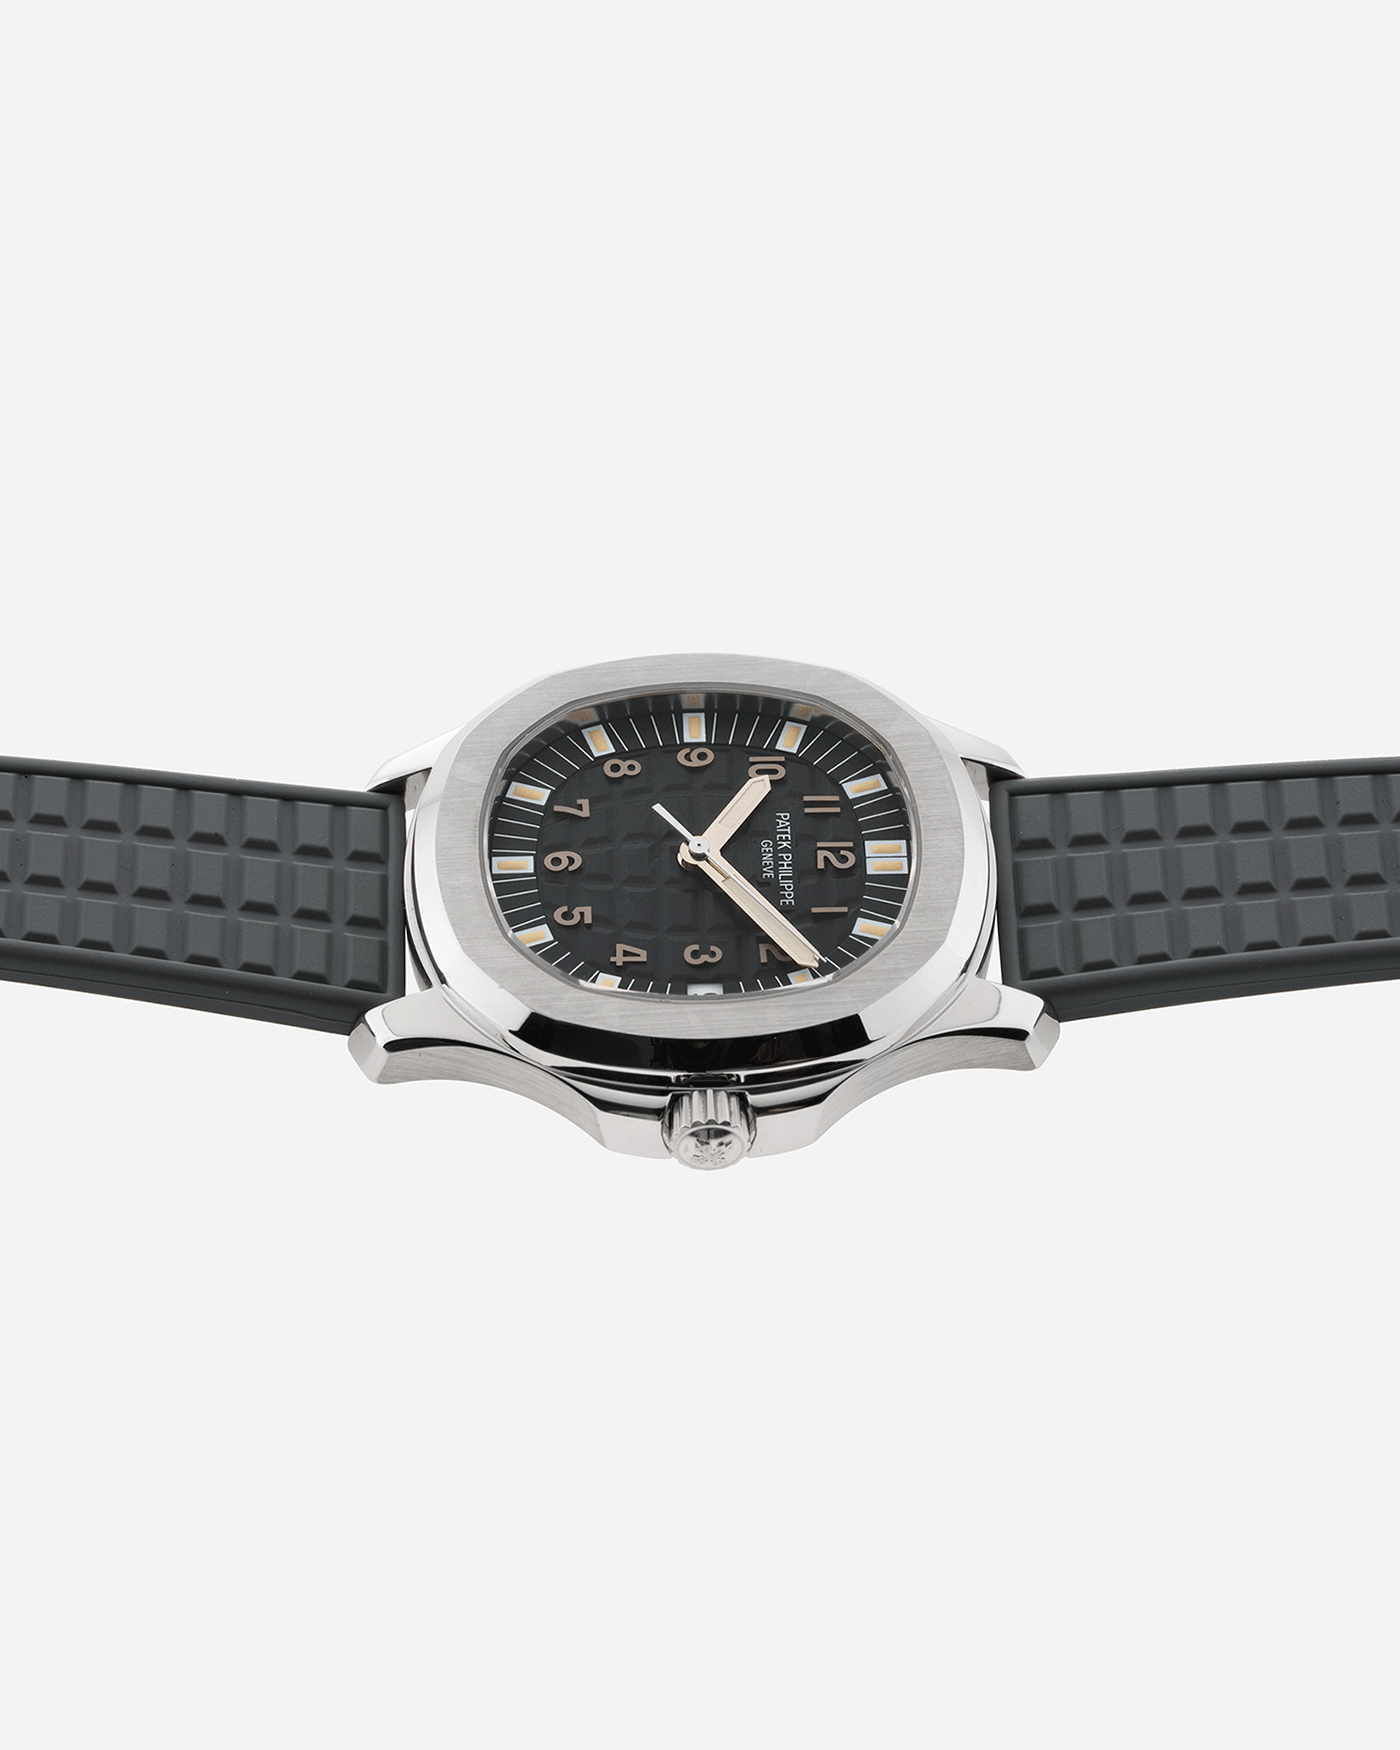 Patek Philippe Aquanaut 5065A Watch | S.Song Timepieces 